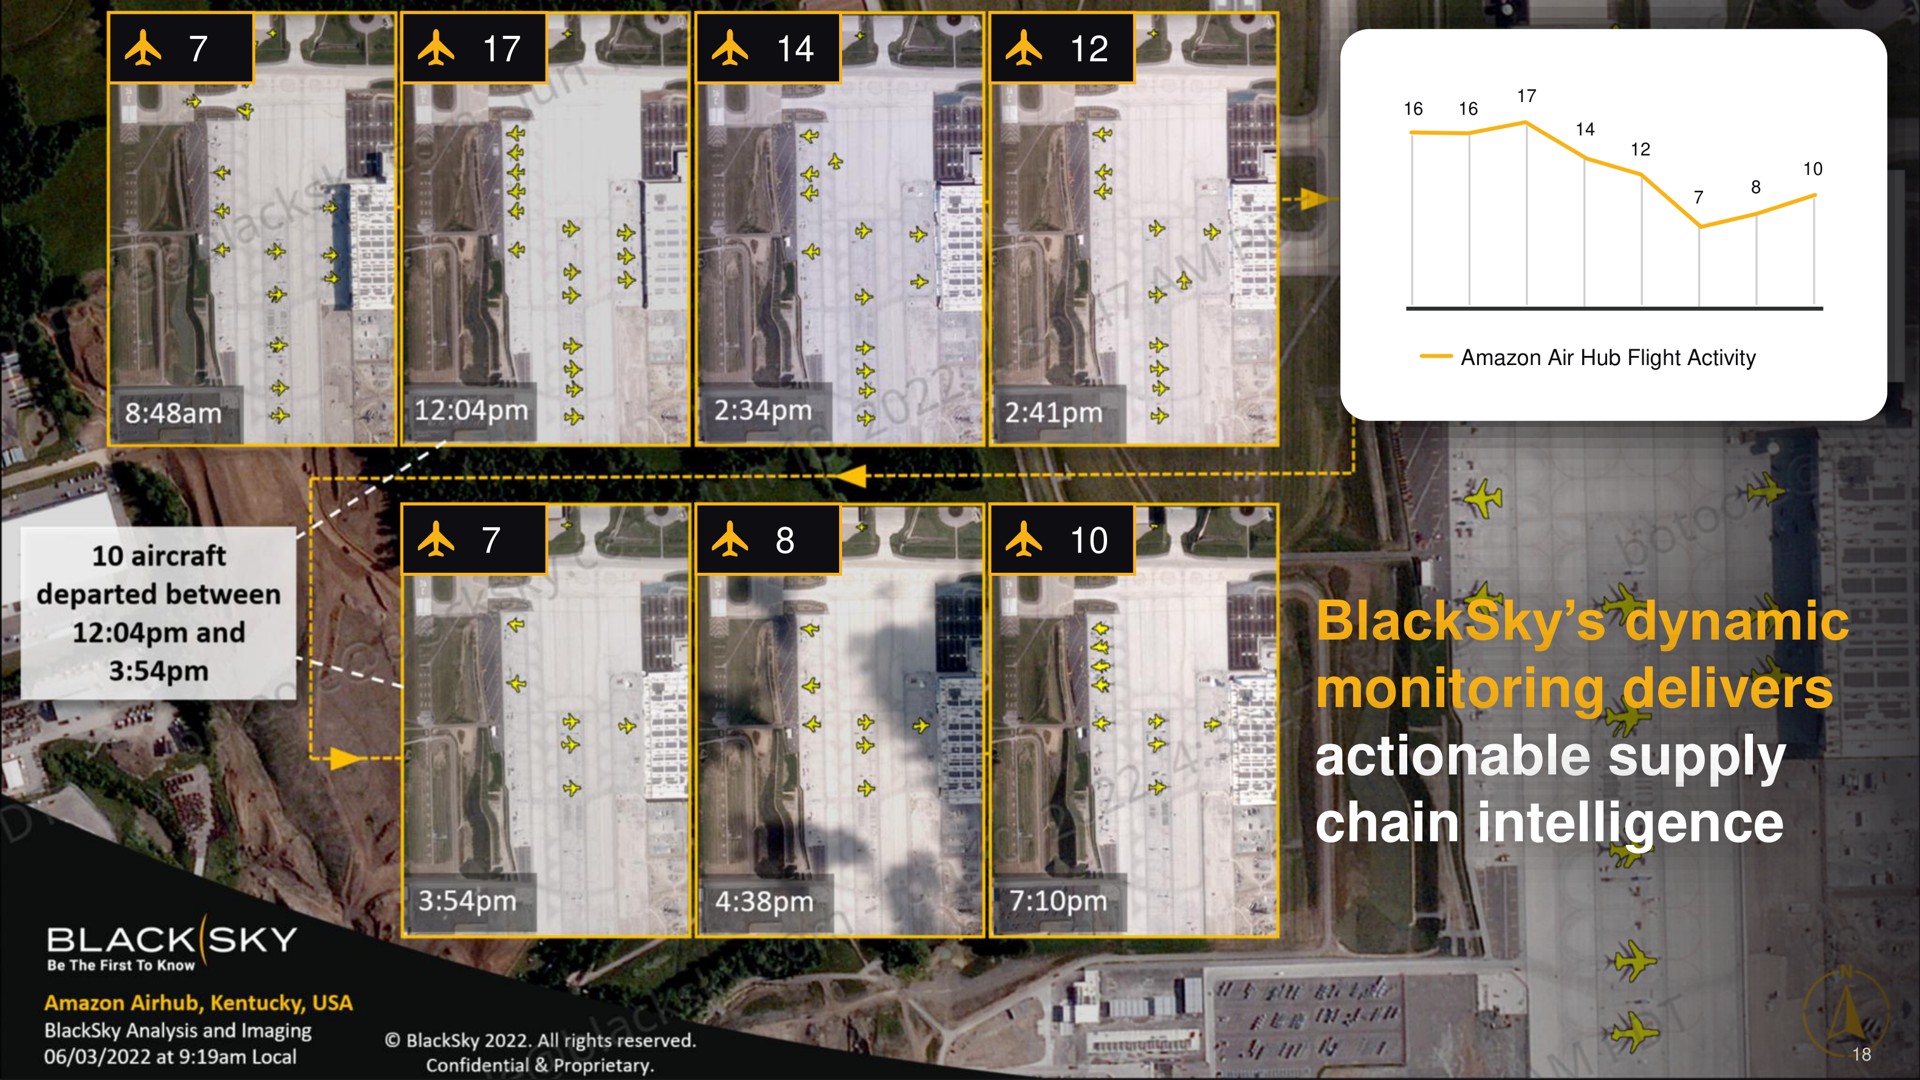 dynamic monitoring provides wildfire detection and response intelligence dynamic monitoring delivers actionable supply chain intelligence by a mal black sky | BlackSky